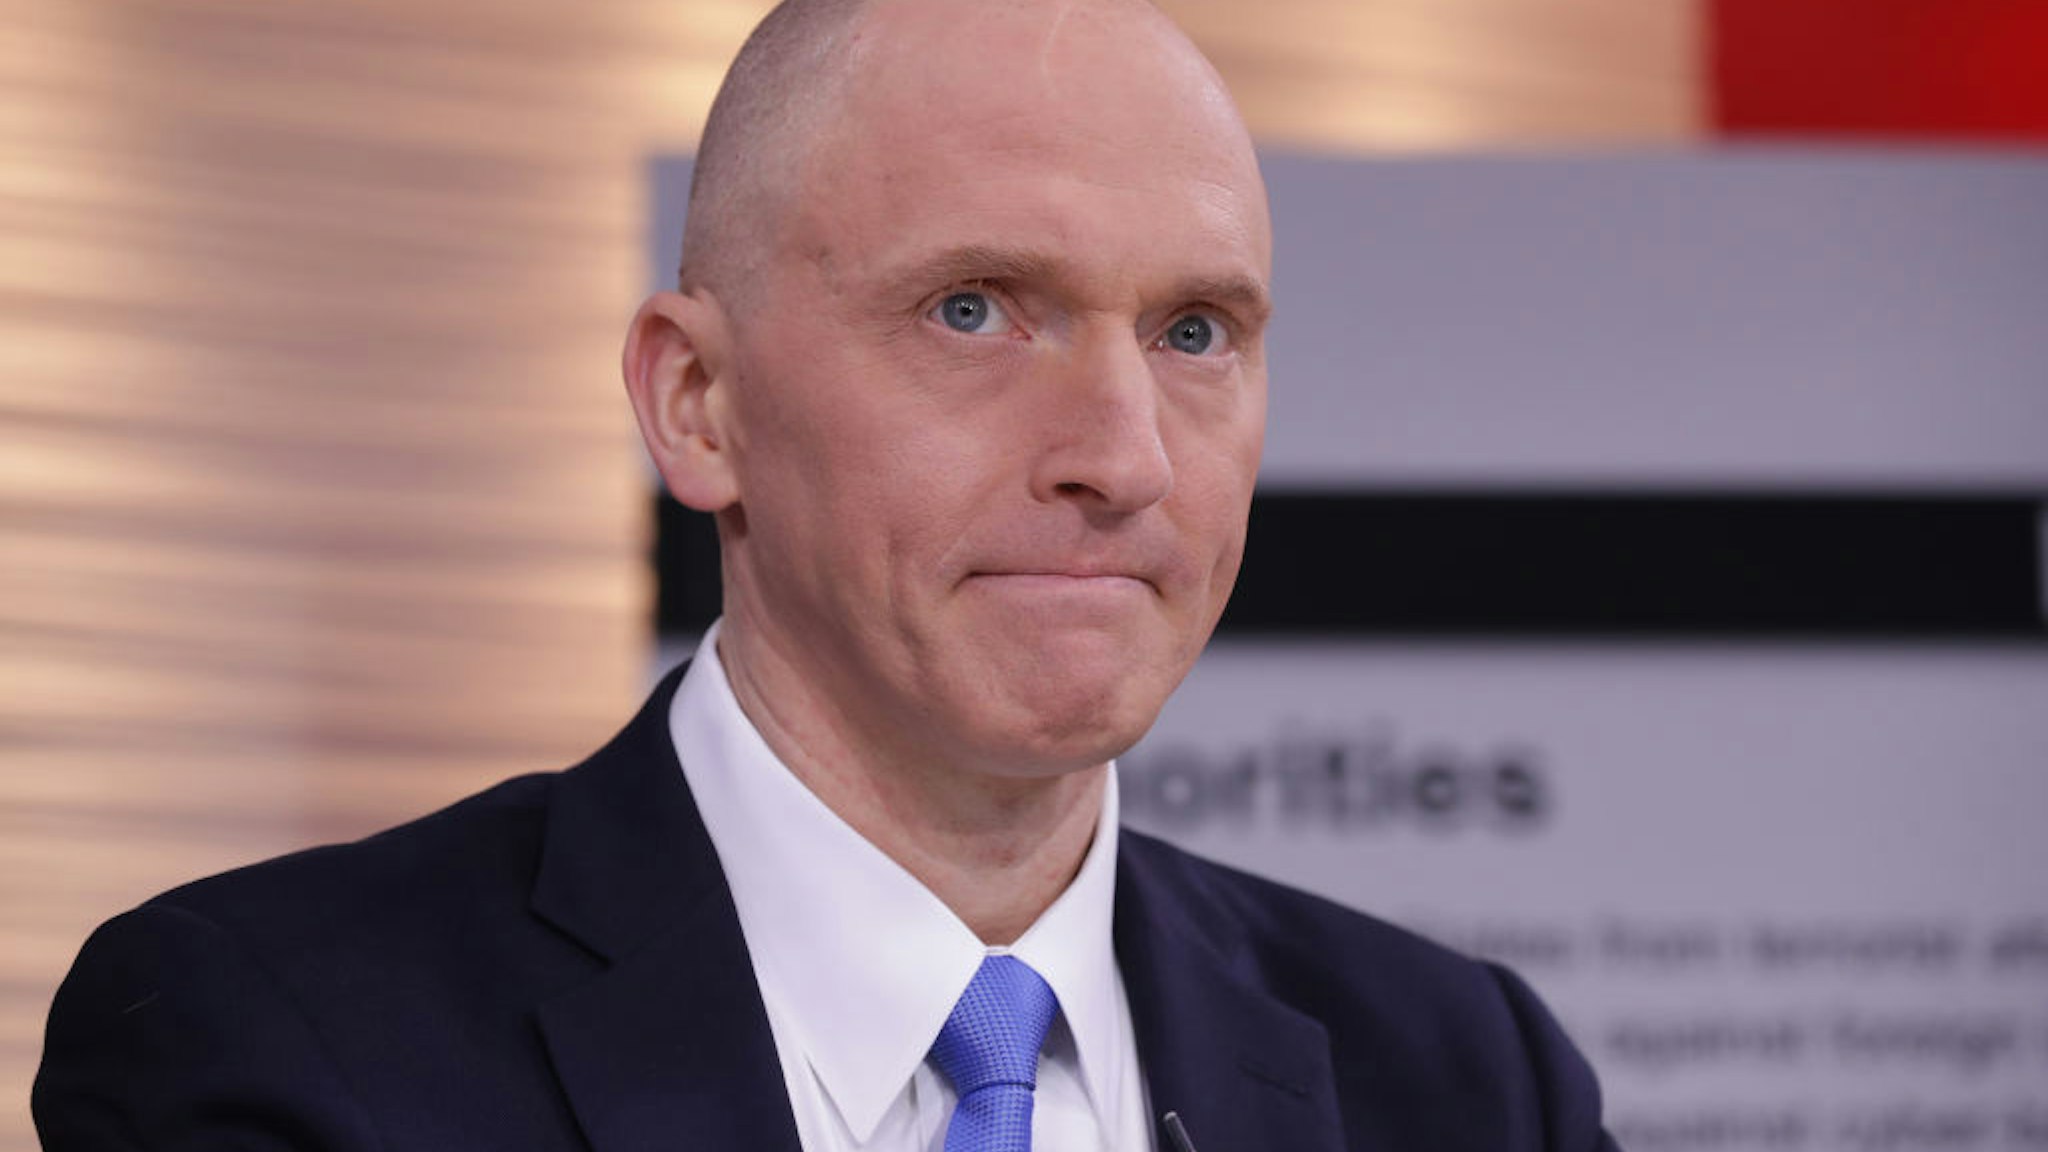 Global Natural Gas Ventures founder Carter Page participates in a discussion on 'politicization of DOJ and the intelligence community in their efforts to undermine the president' hosted by Judicial Watch at the One America News studios on Capitol Hill May 29, 2019 in Washington, DC.